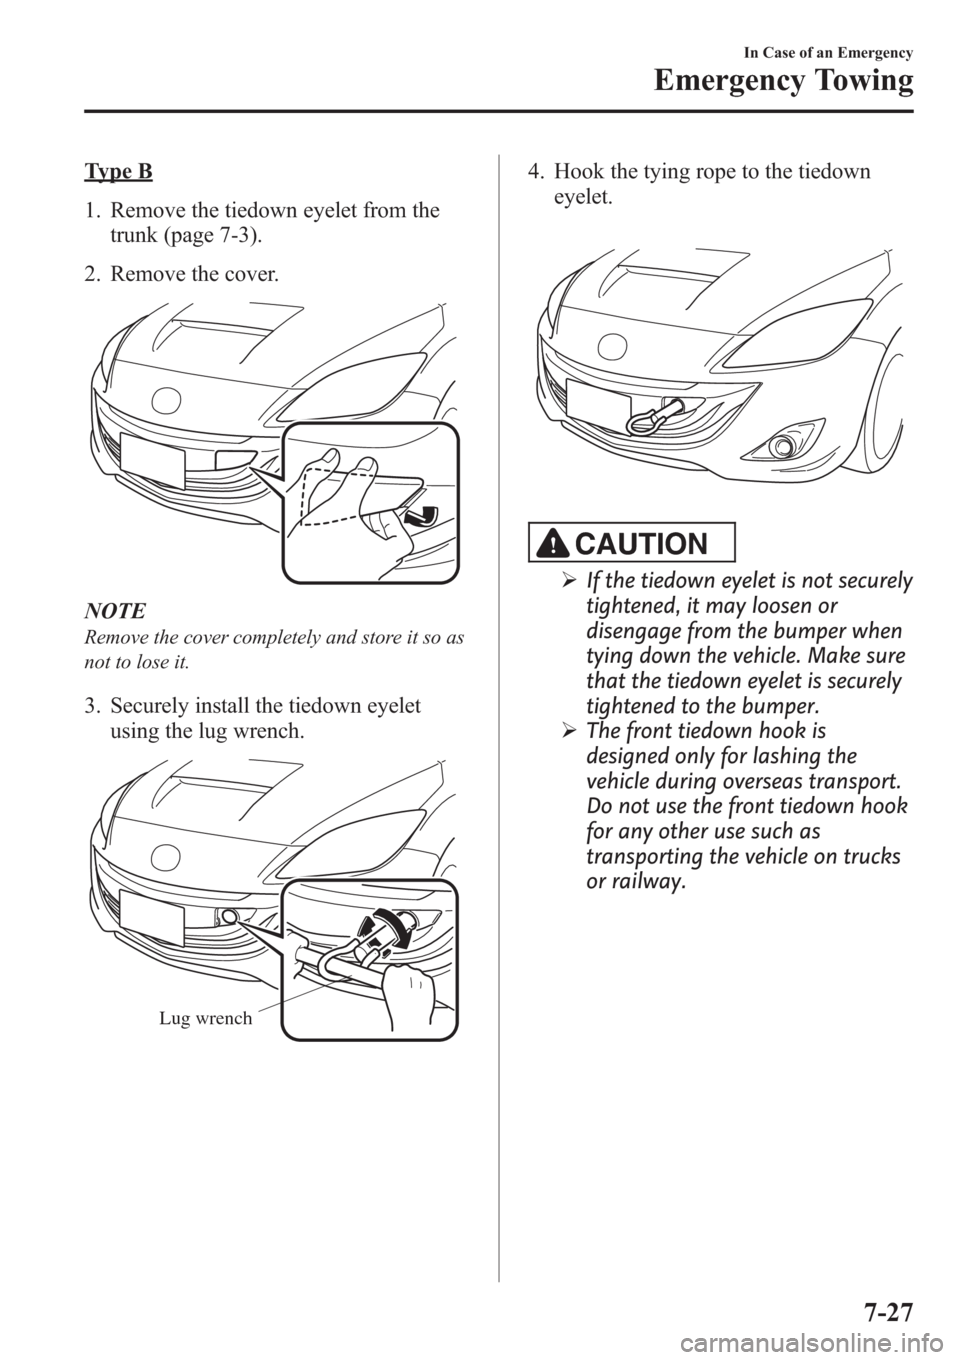 MAZDA MODEL 3 HATCHBACK 2013  Owners Manual (in English) Type B
1. Remove the tiedown eyelet from the
trunk (page 7-3).
2. Remove the cover.
NOTE
Remove the cover completely and store it so as
not to lose it.
3. Securely install the tiedown eyelet
using the